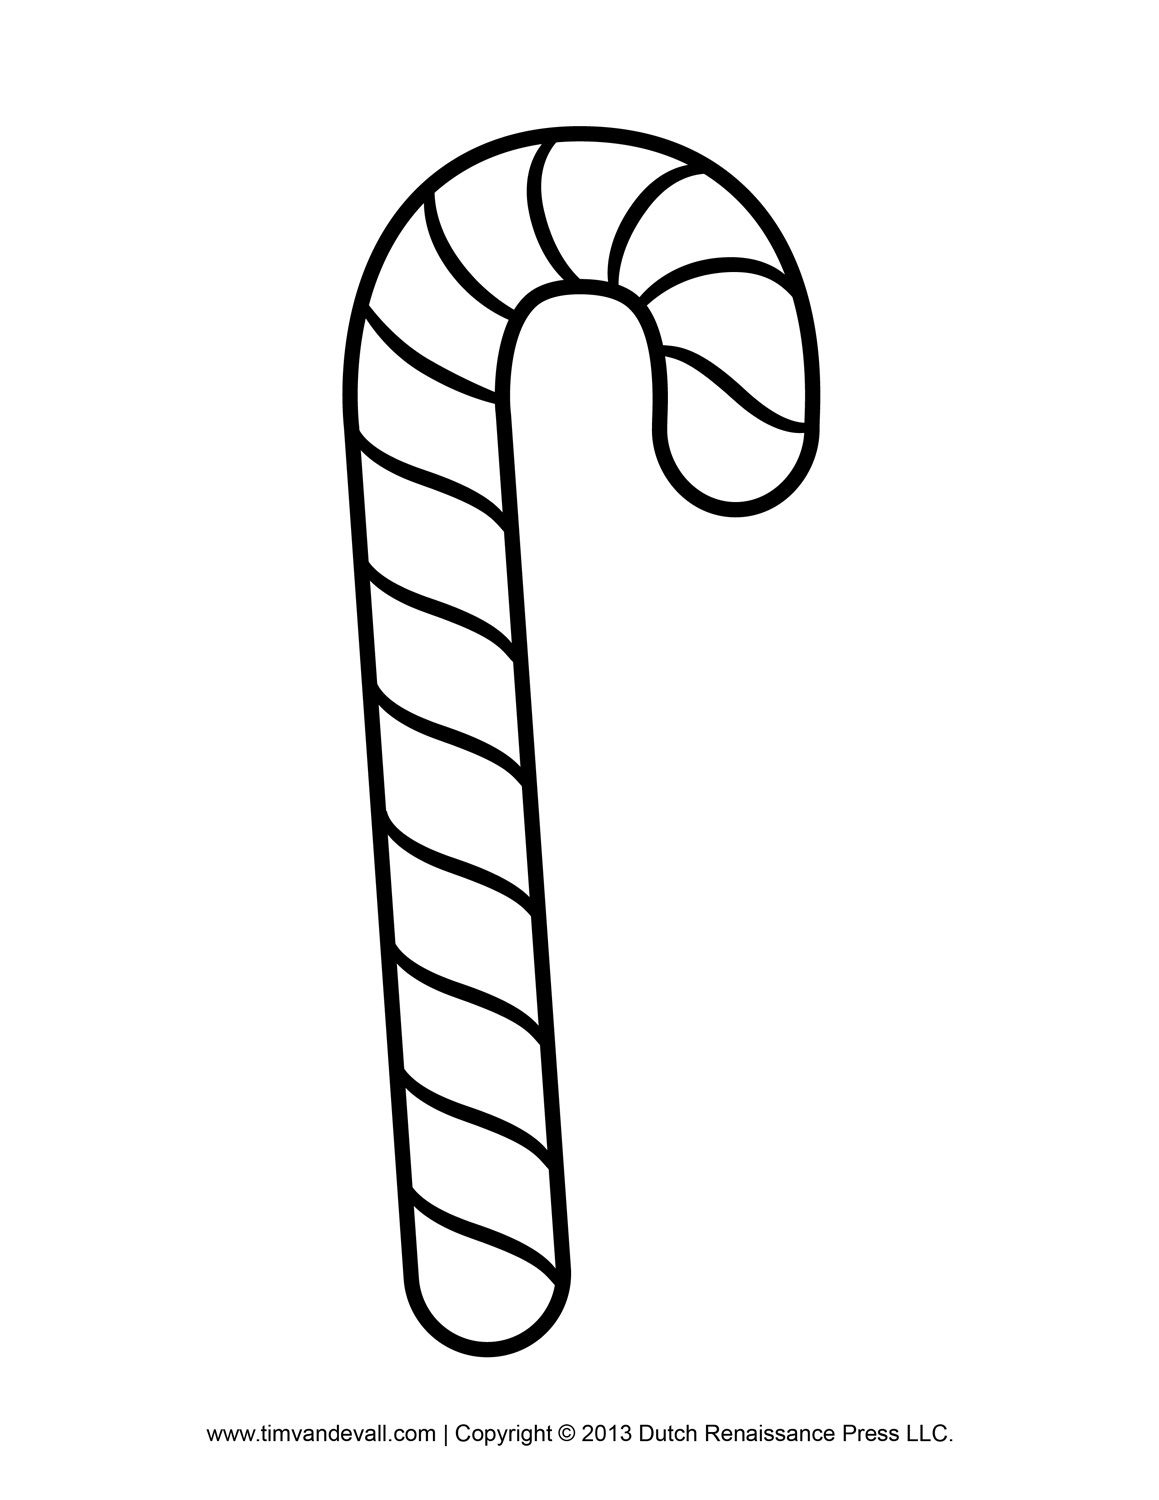 Free Printable Candy Cane Coloring Pages throughout Free Candy Cane Template Printable